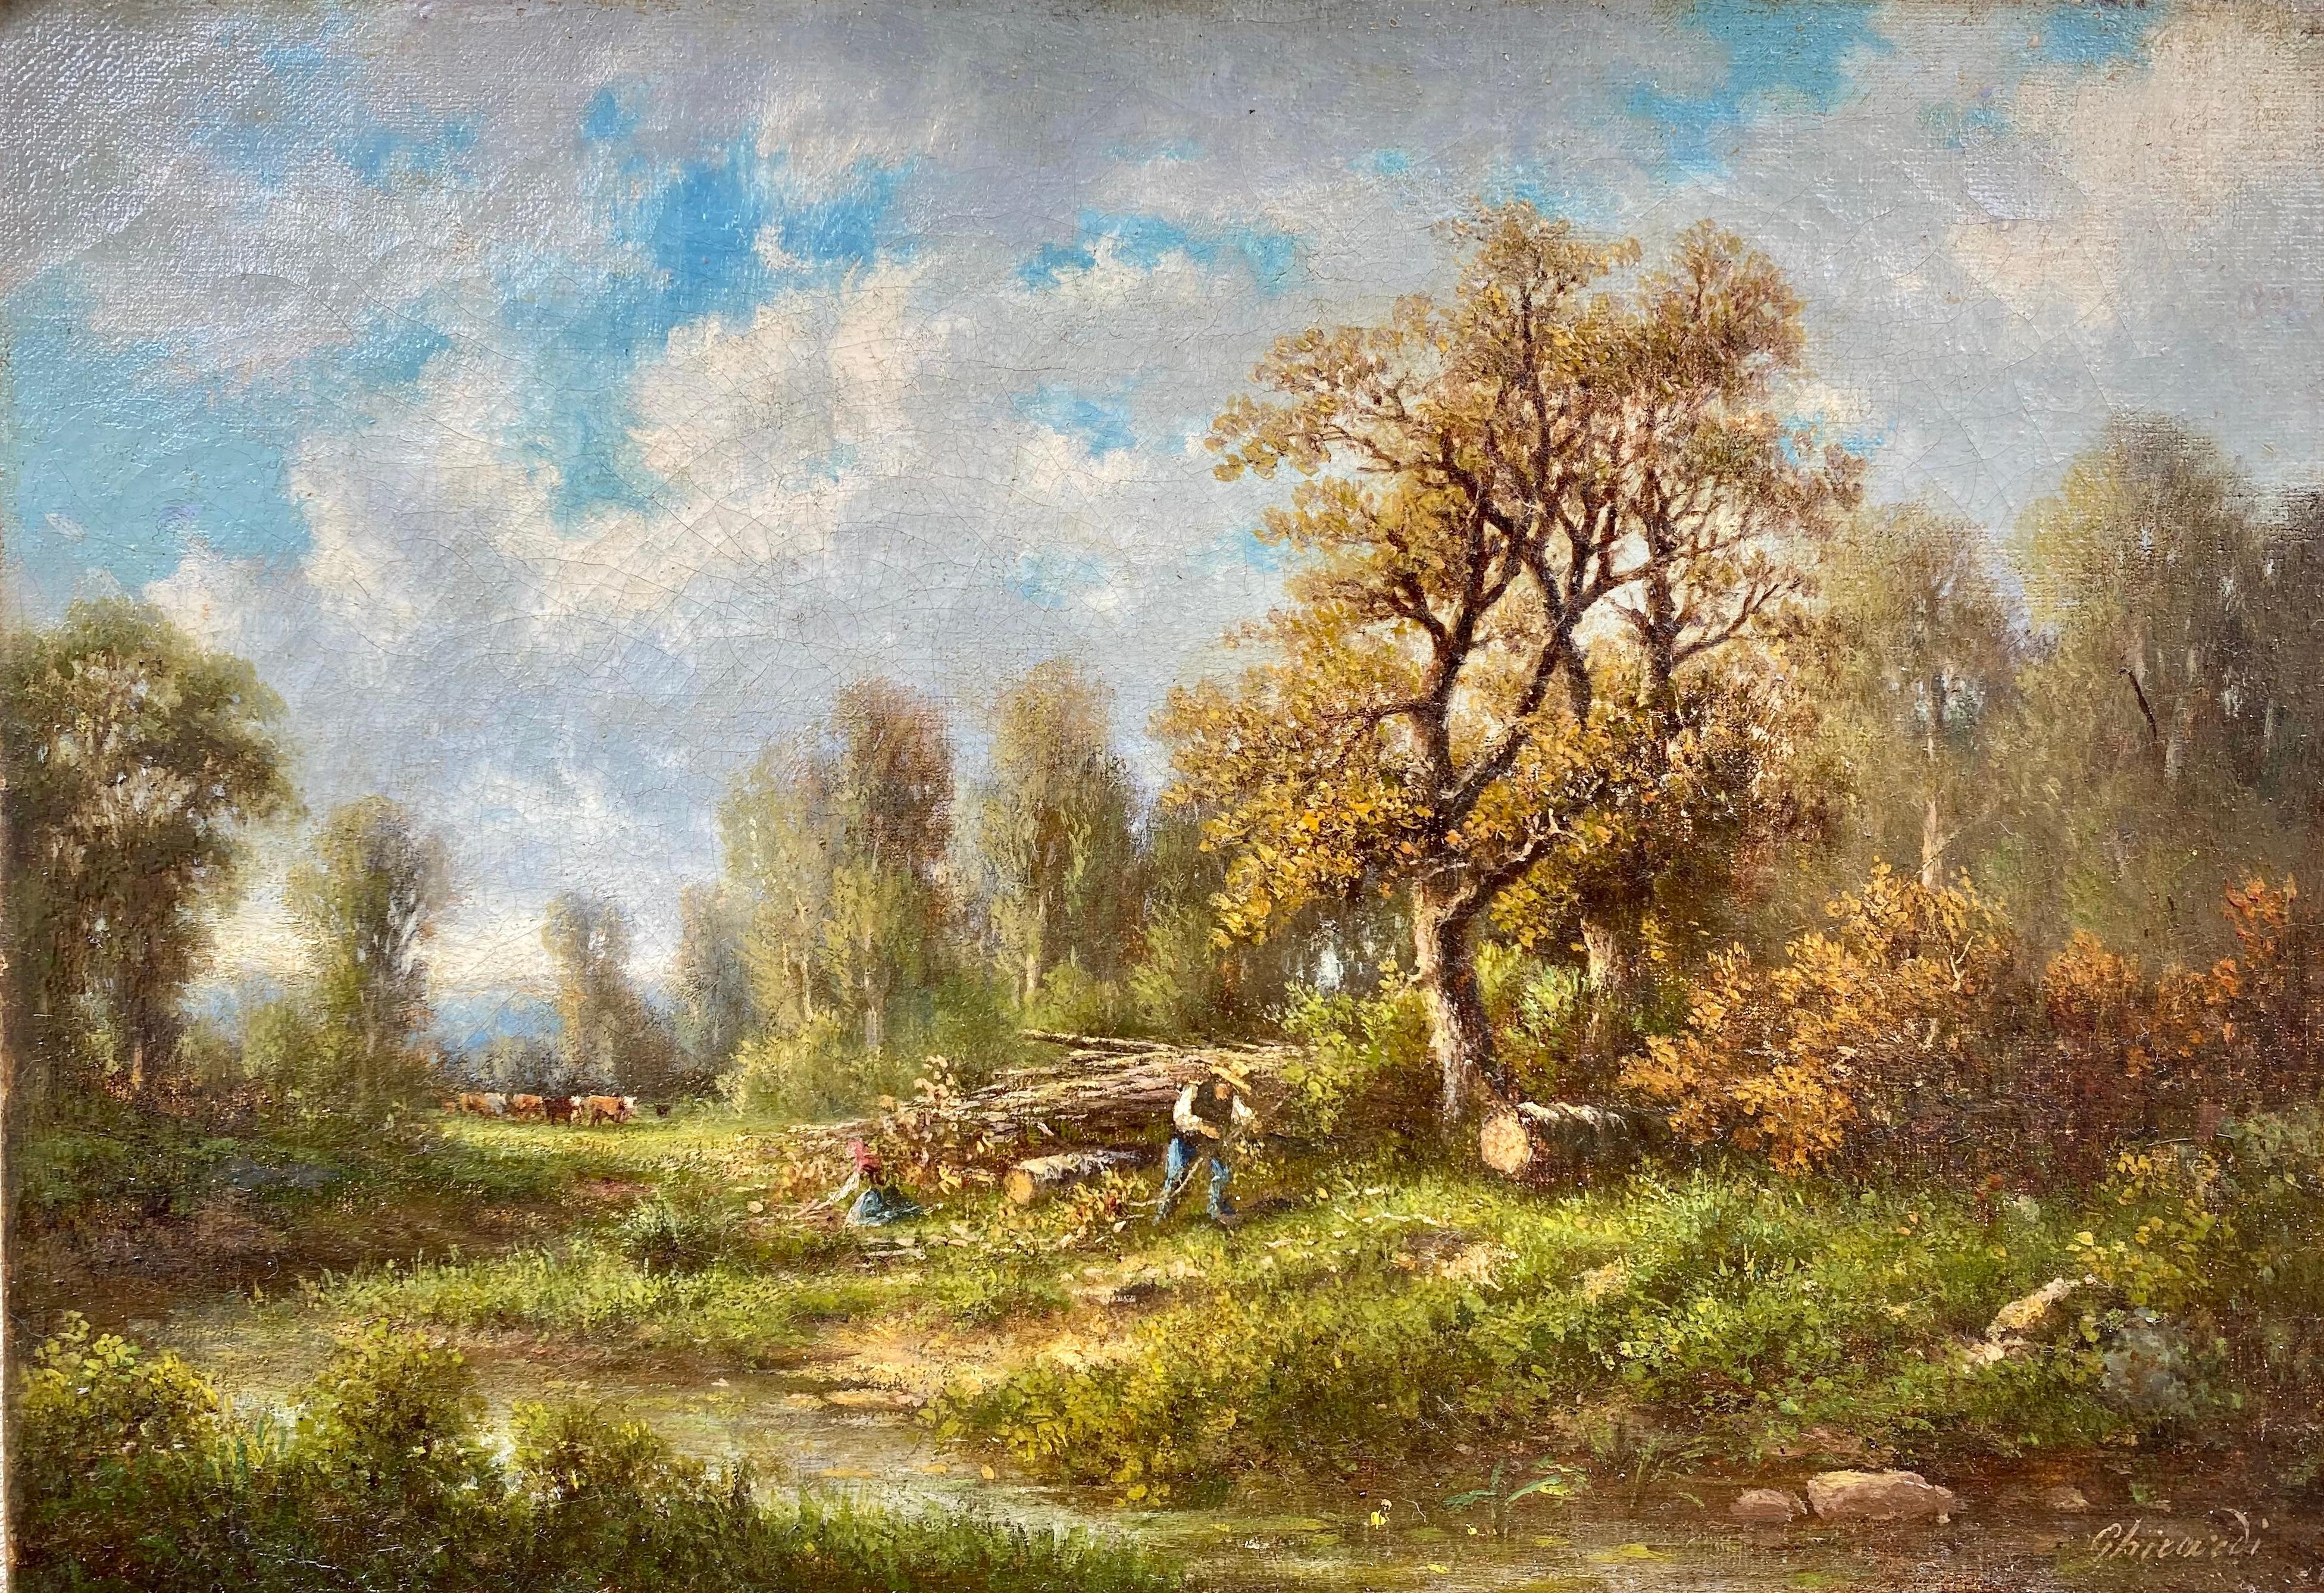 French 19th Century Barbizon painting rural scene with figures gathering wood  - Painting by Théodore Ghirardi